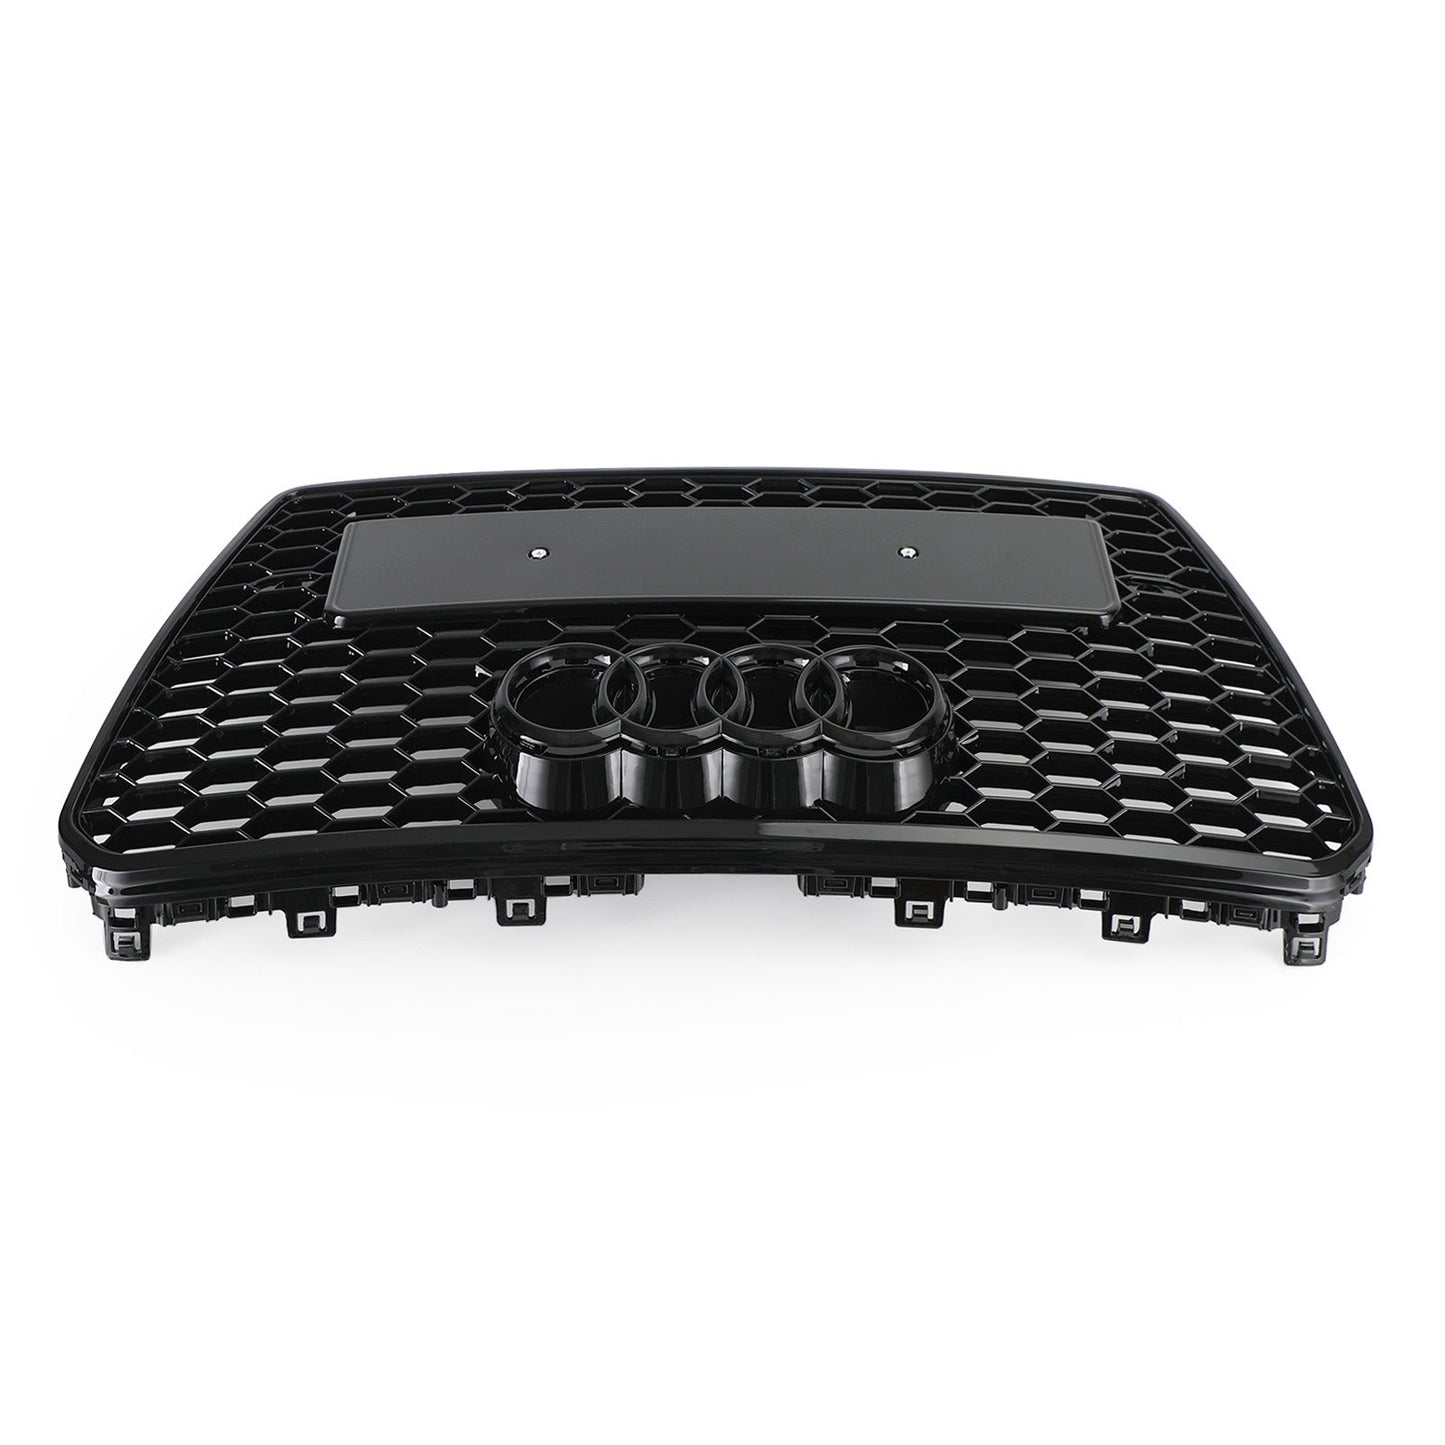 2012-2015 Audi A7/S7 Grille Grill RS7 Style Honeycomb Sport Mesh Hex Black